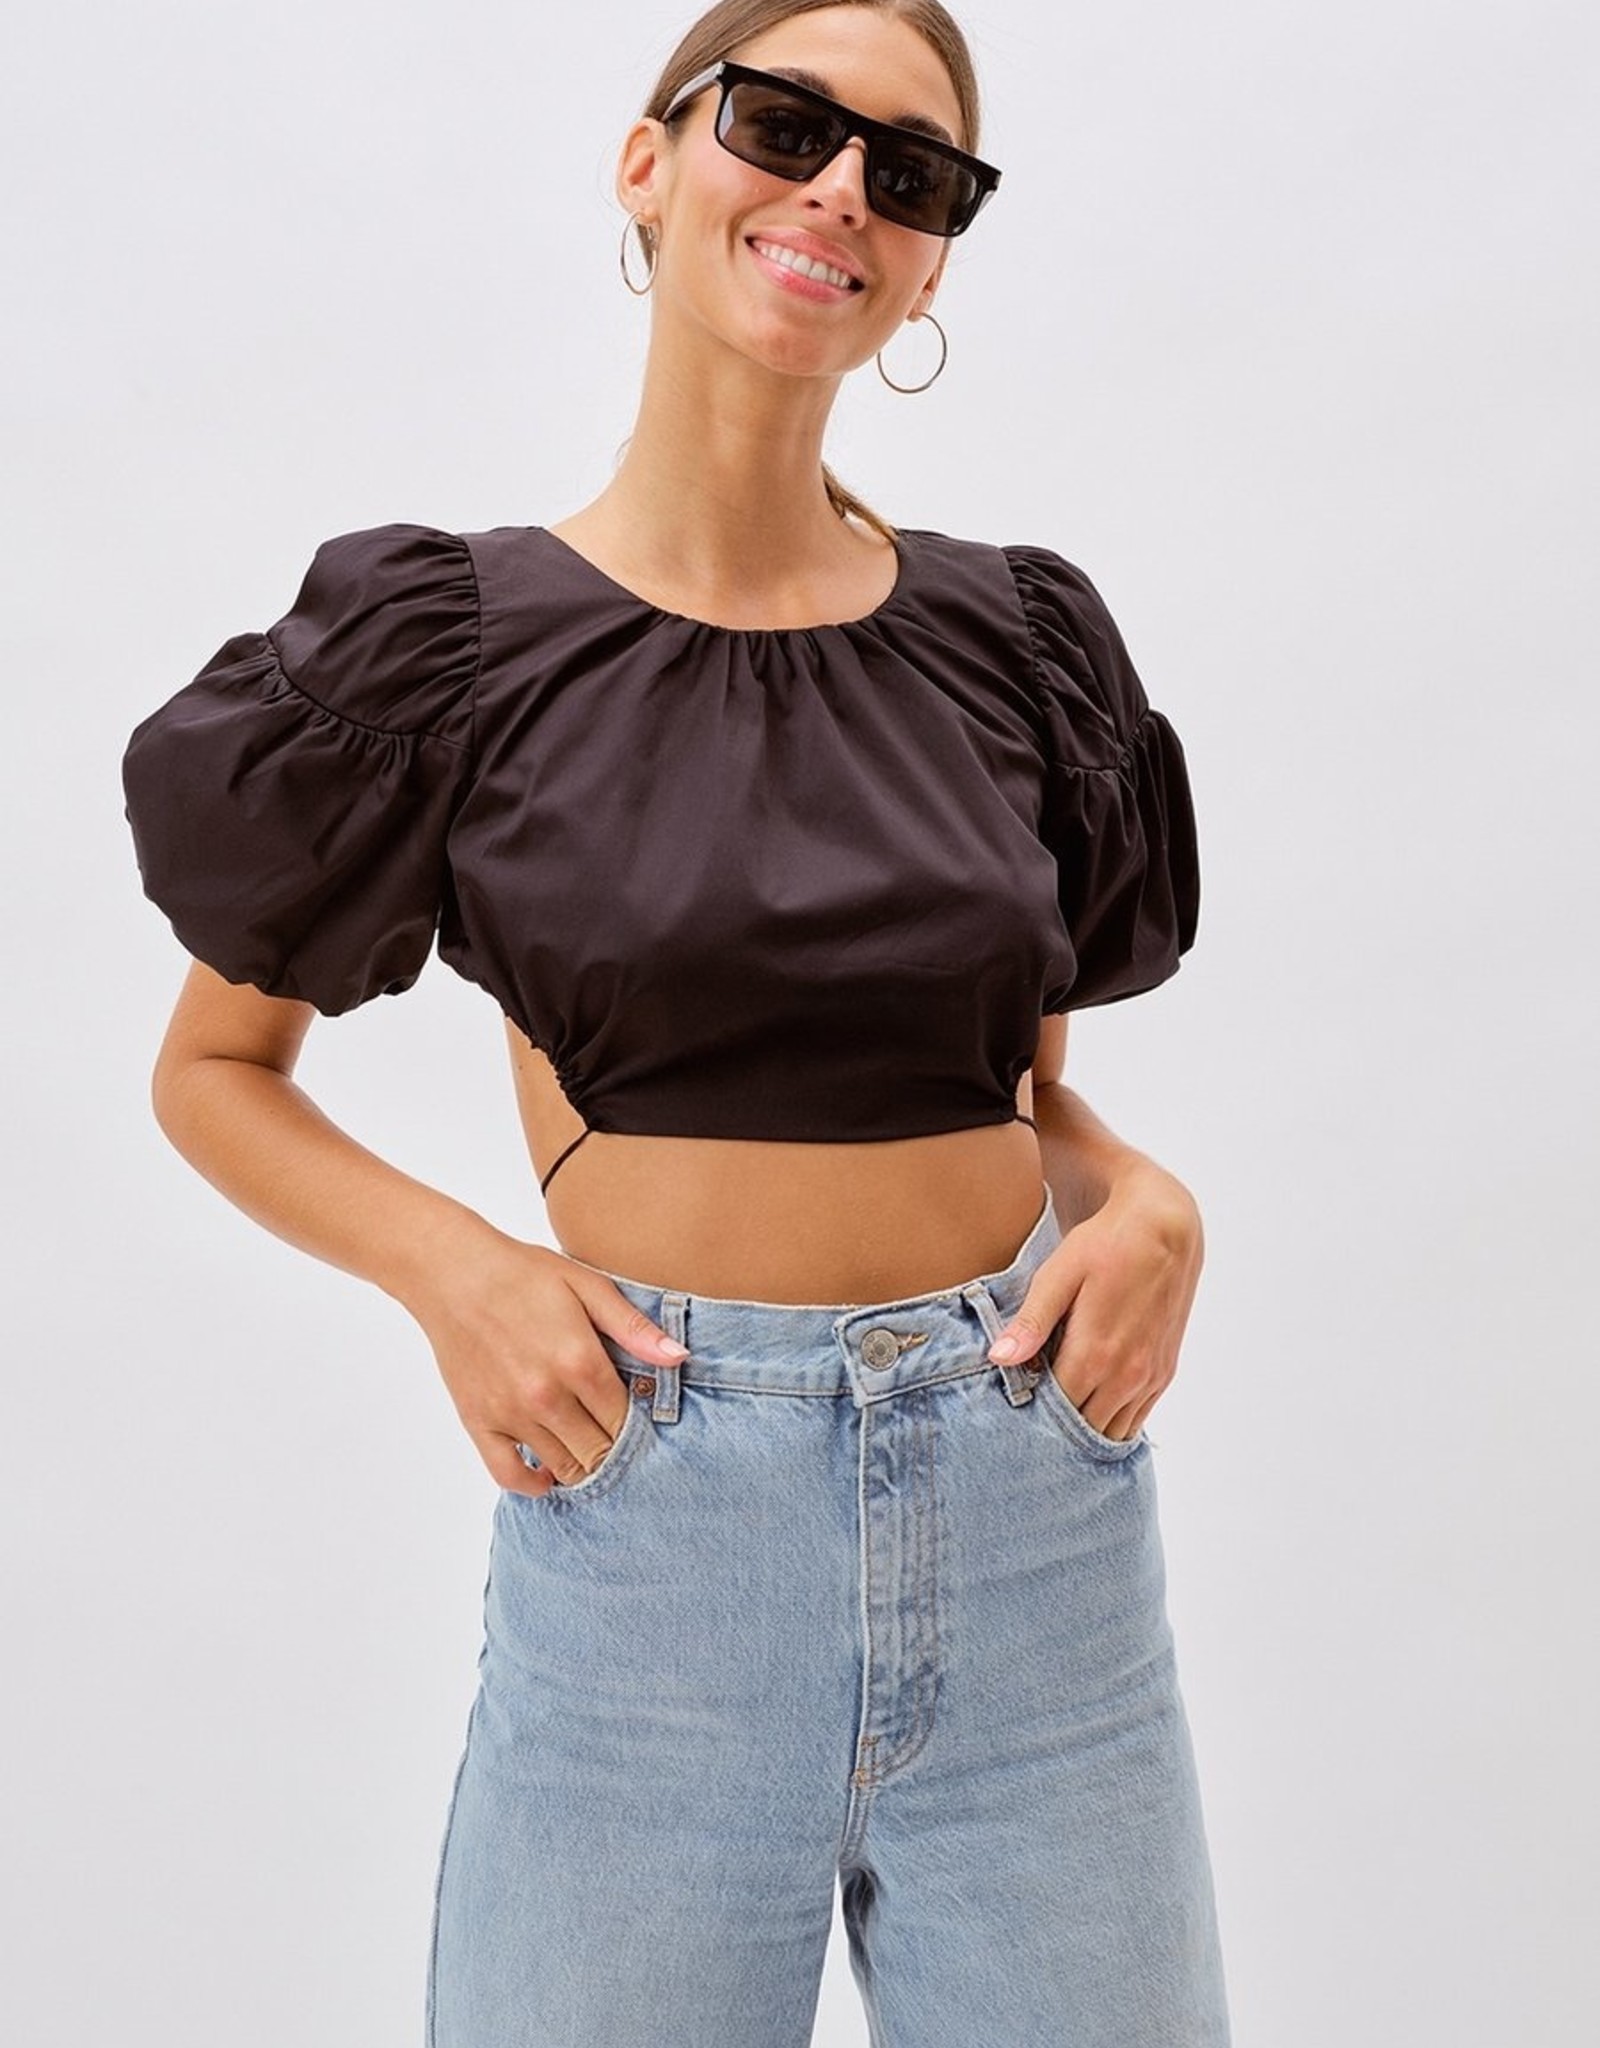 For Love and Lemon CT1727 Joanna Crop Top